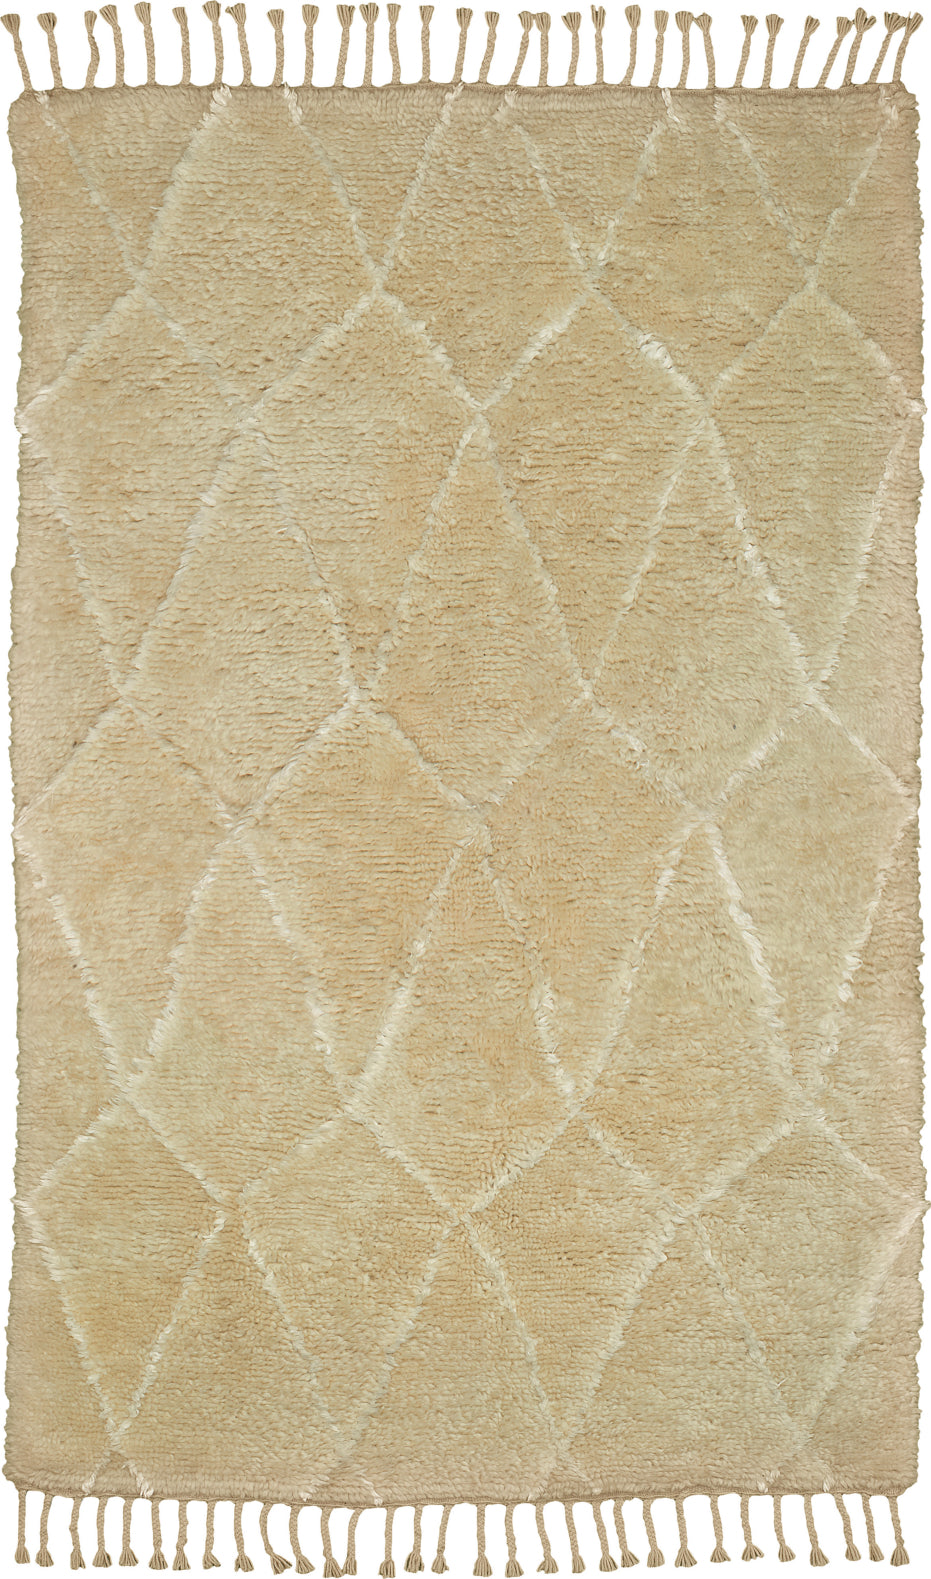 LR Resources Moroccan 4425 Ivory Area Rug main image